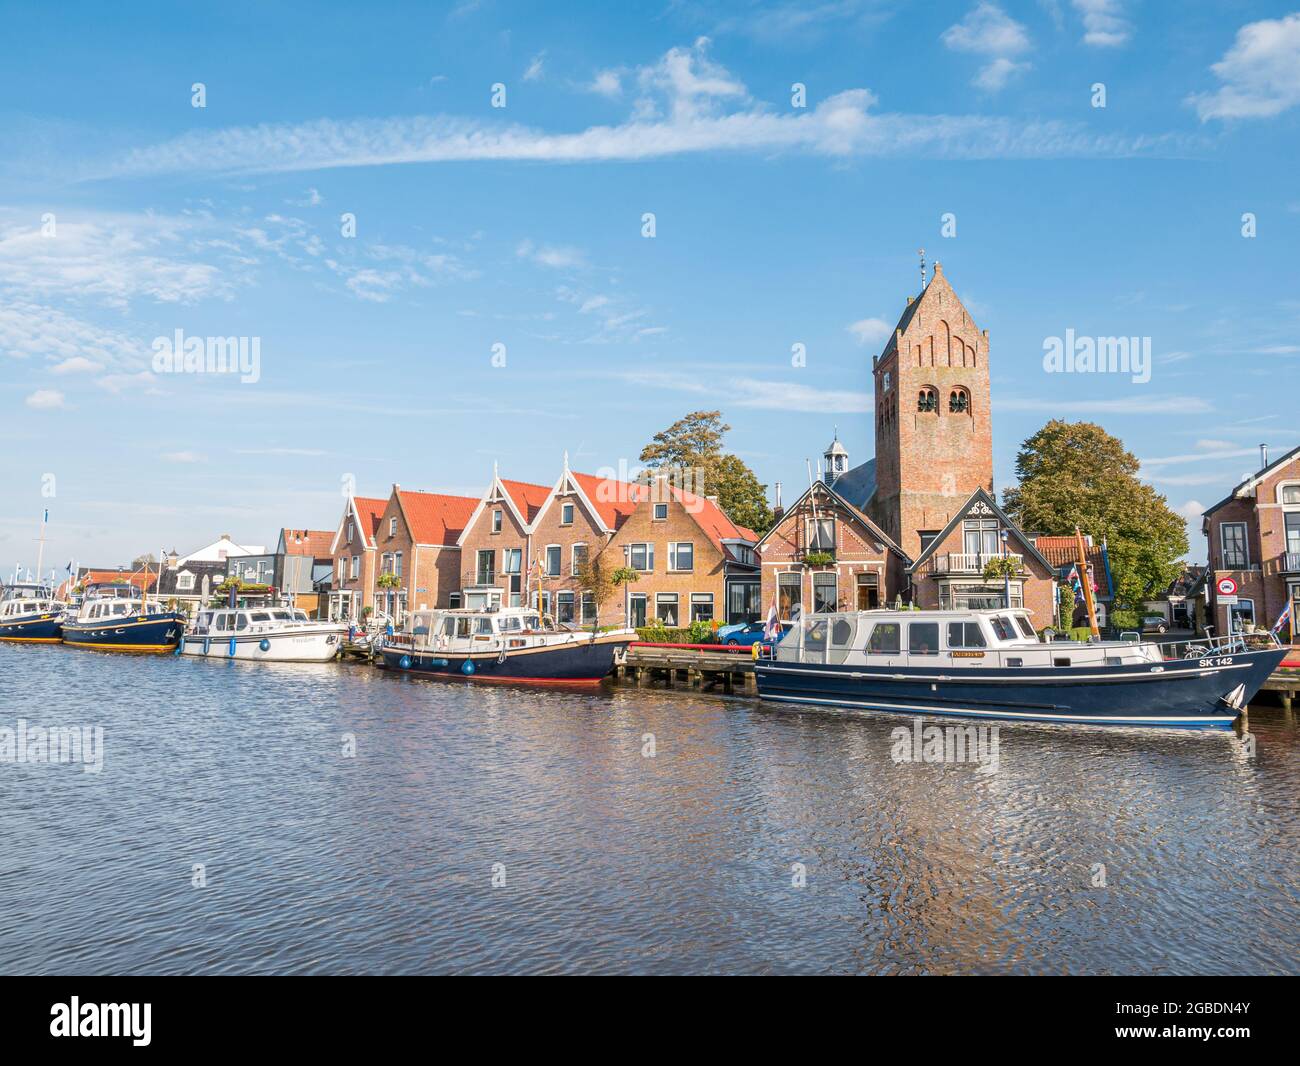 Boats, houses and church tower in old town of Grouw, Friesland, Netherlands Stock Photo